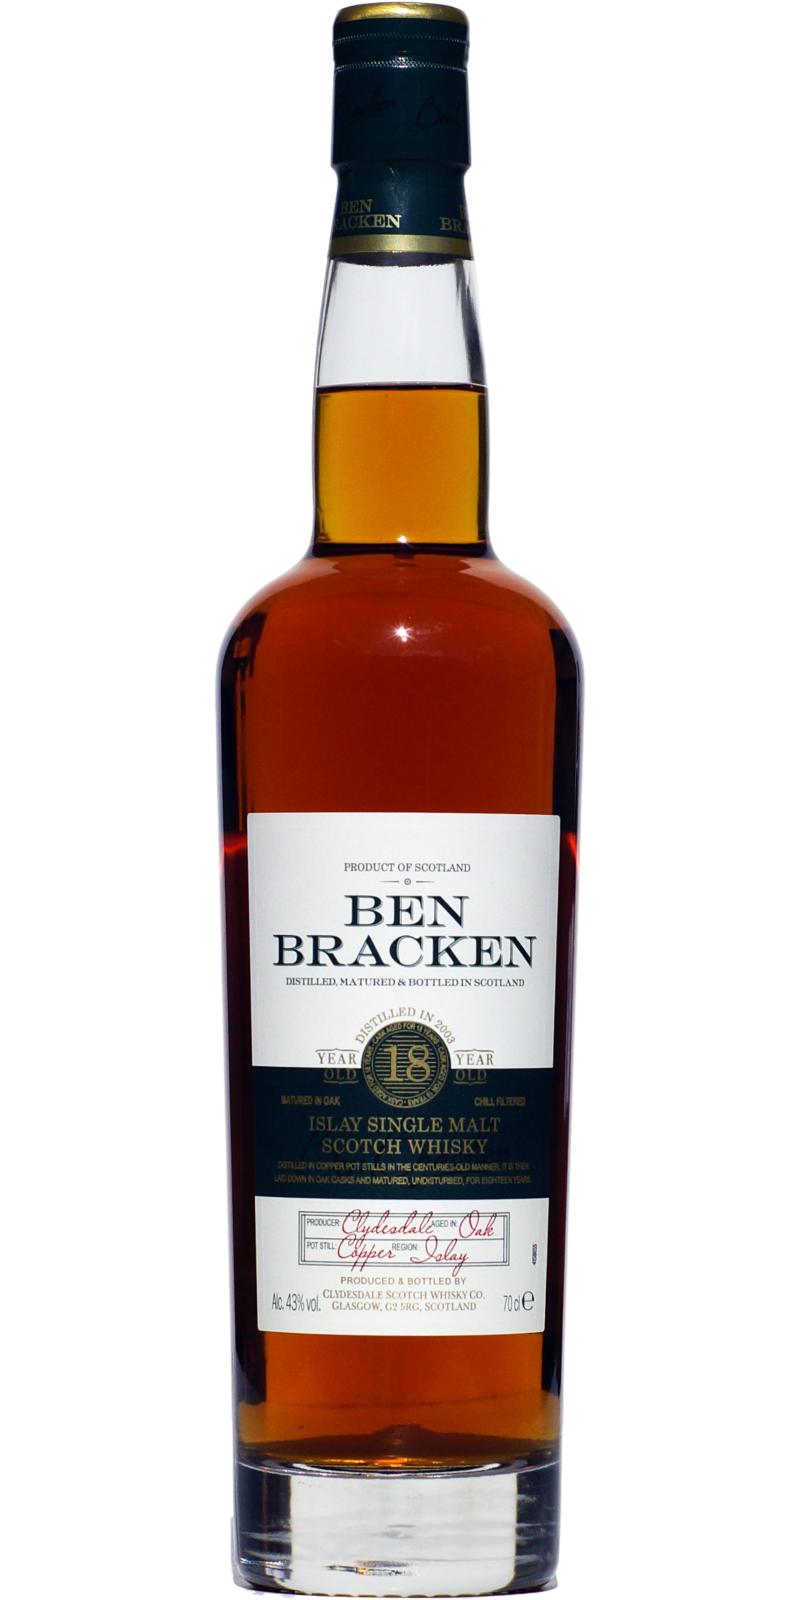 Ben Bracken 18-year-old Cd - Ratings and reviews - Whiskybase